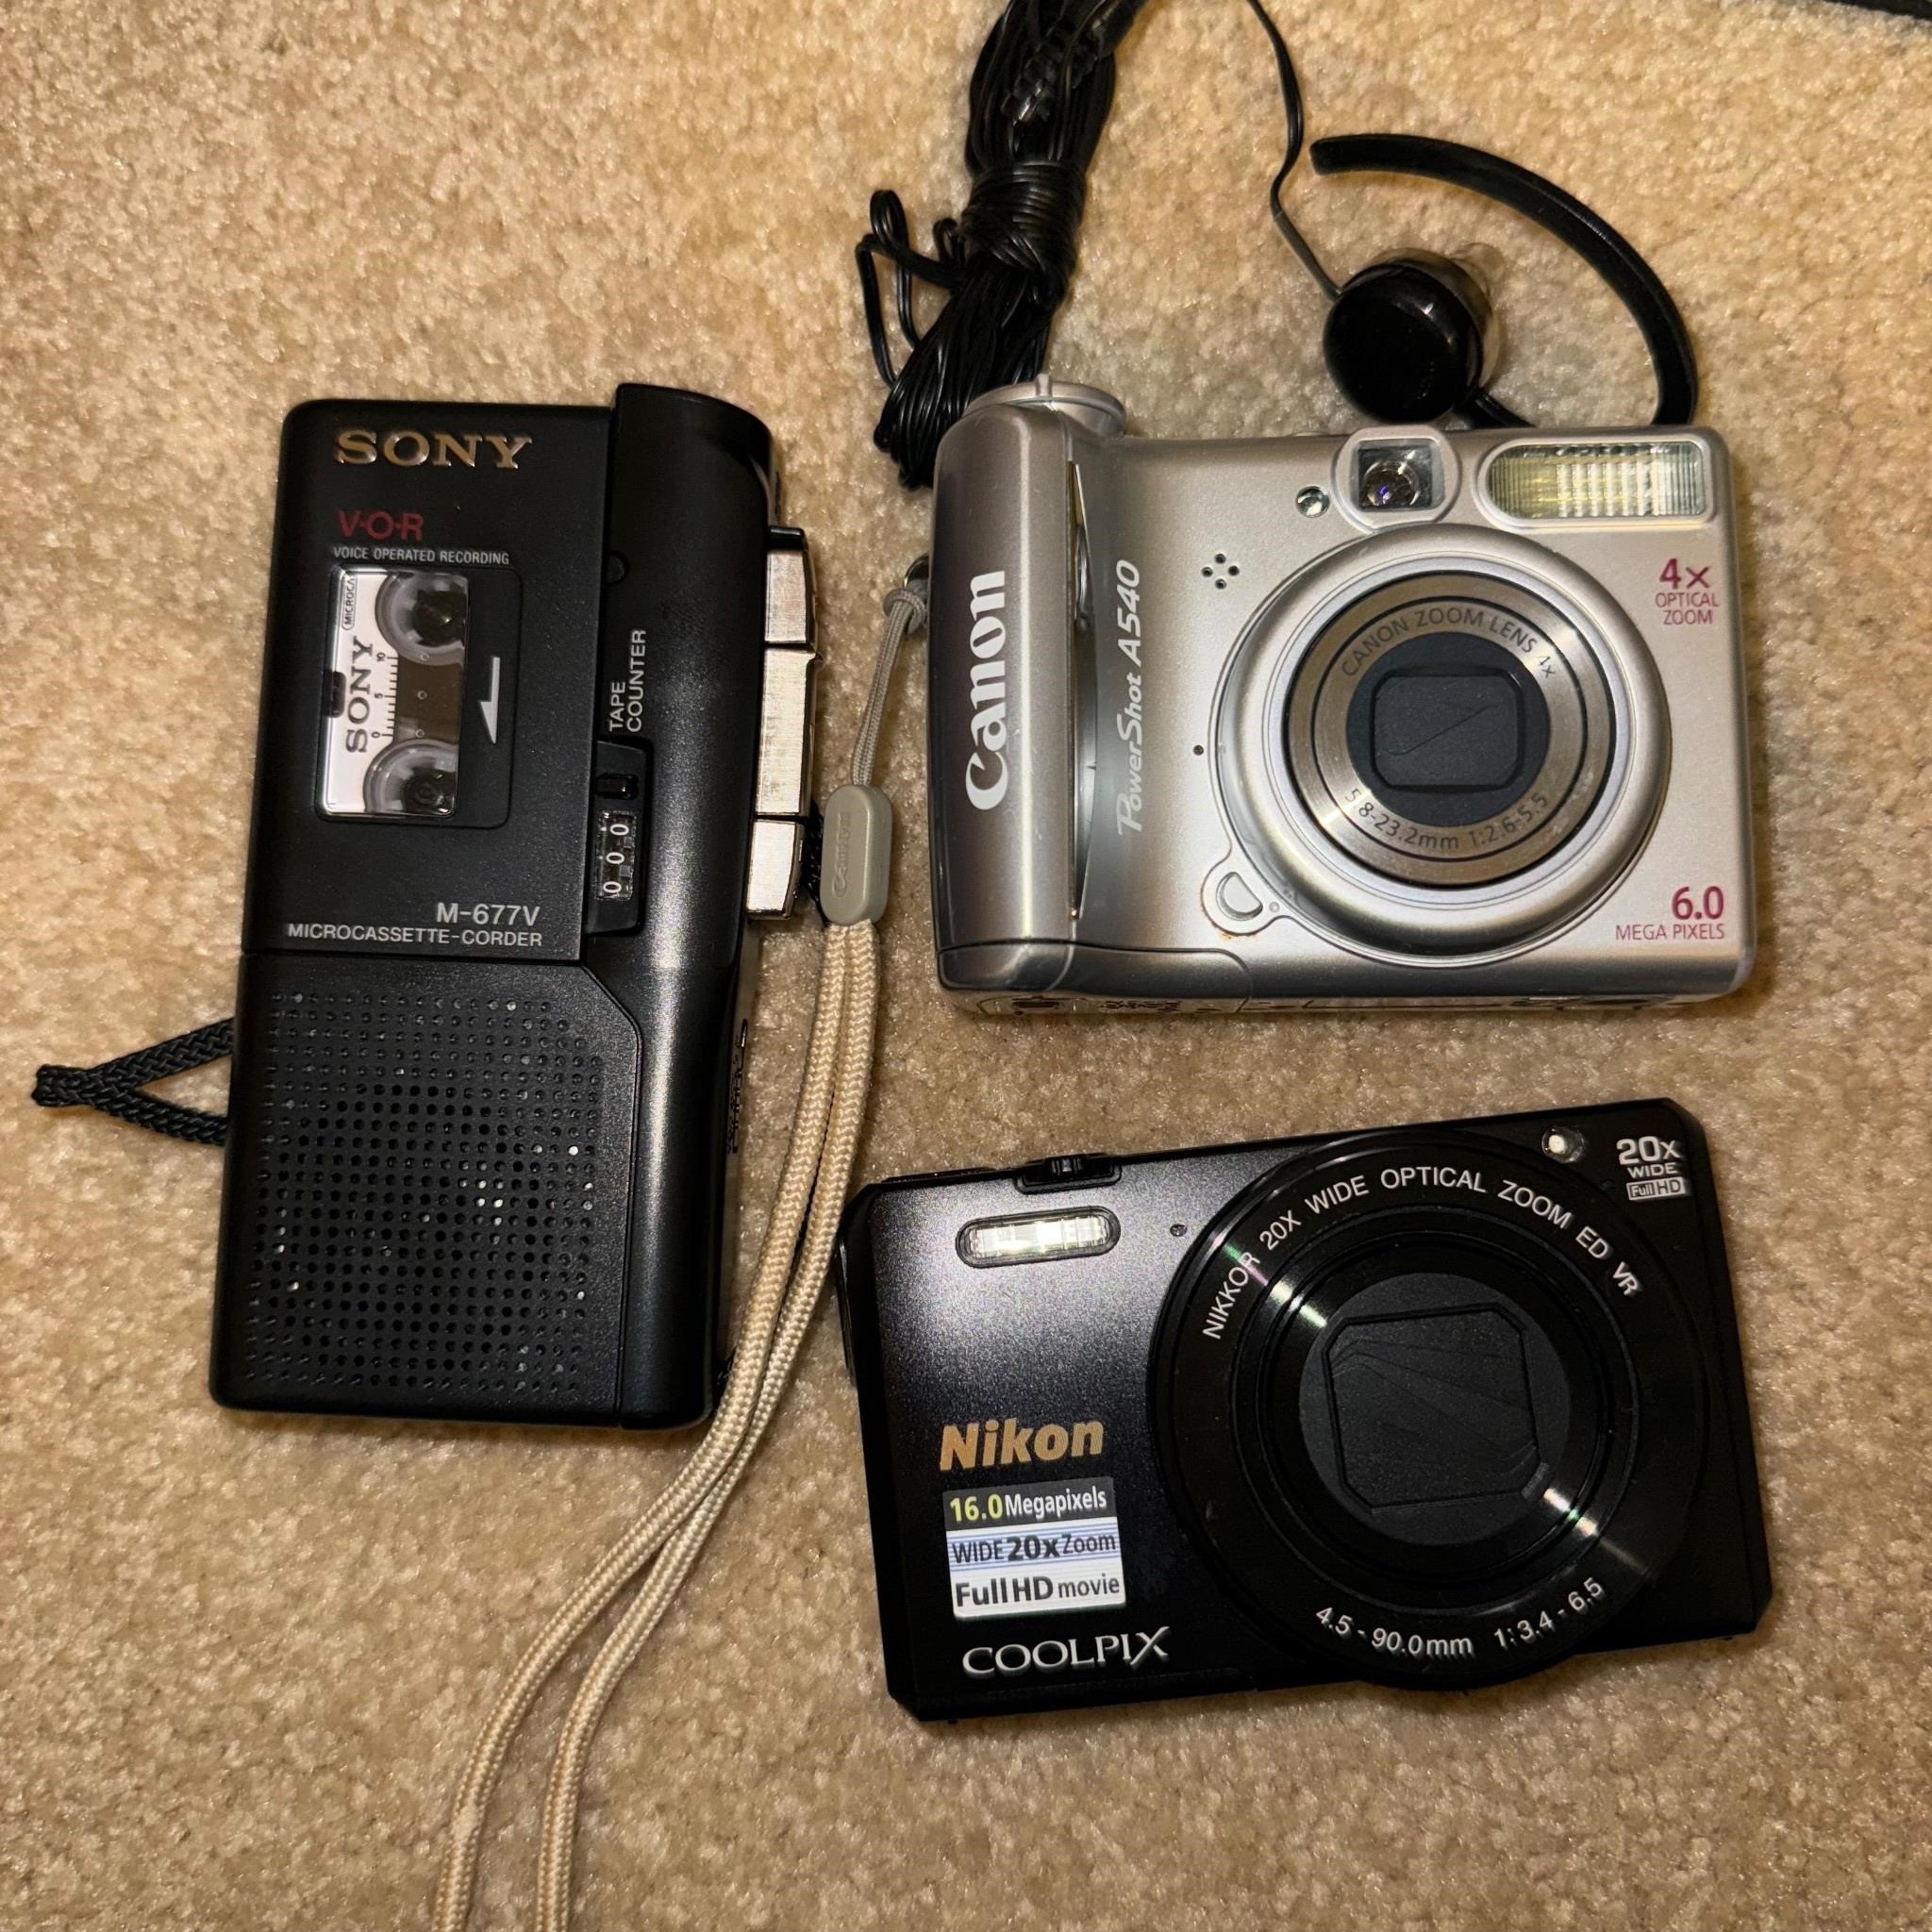 2 digital camera's, 1 tape recorder. See pictures